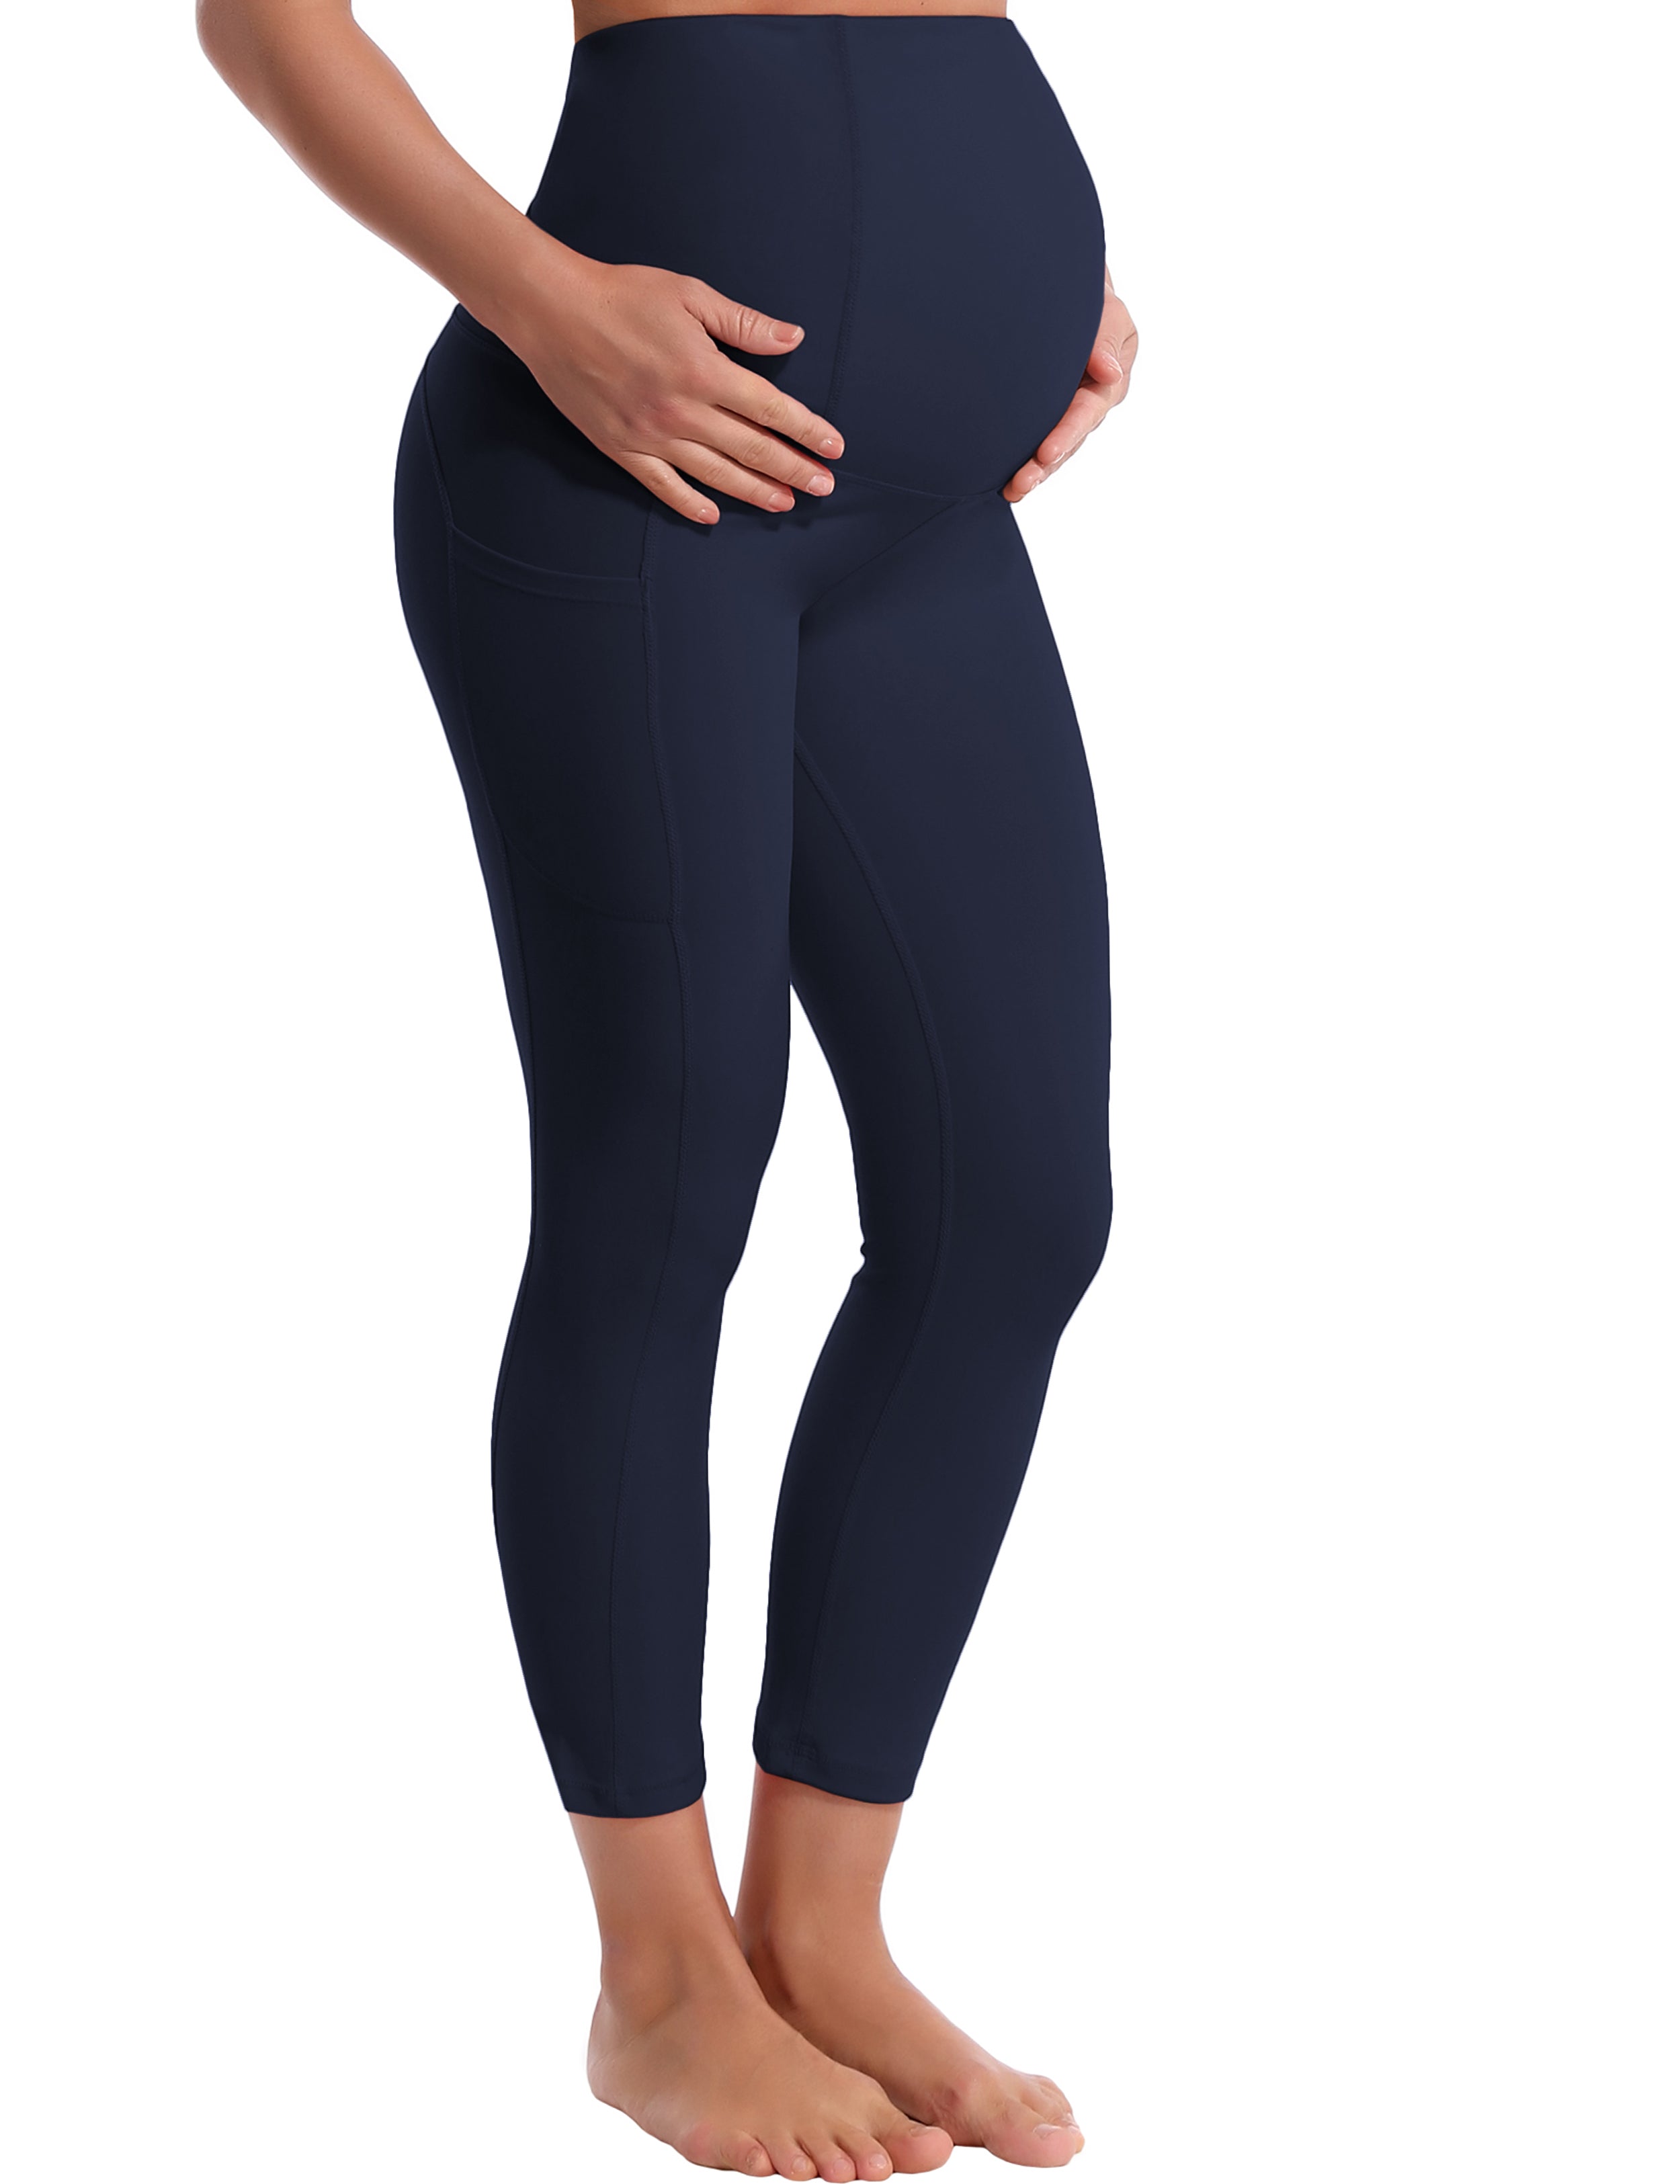 22" Side Pockets Maternity Jogging Pants darknavy 87%Nylon/13%Spandex Softest-ever fabric High elasticity 4-way stretch Fabric doesn't attract lint easily No see-through Moisture-wicking Machine wash